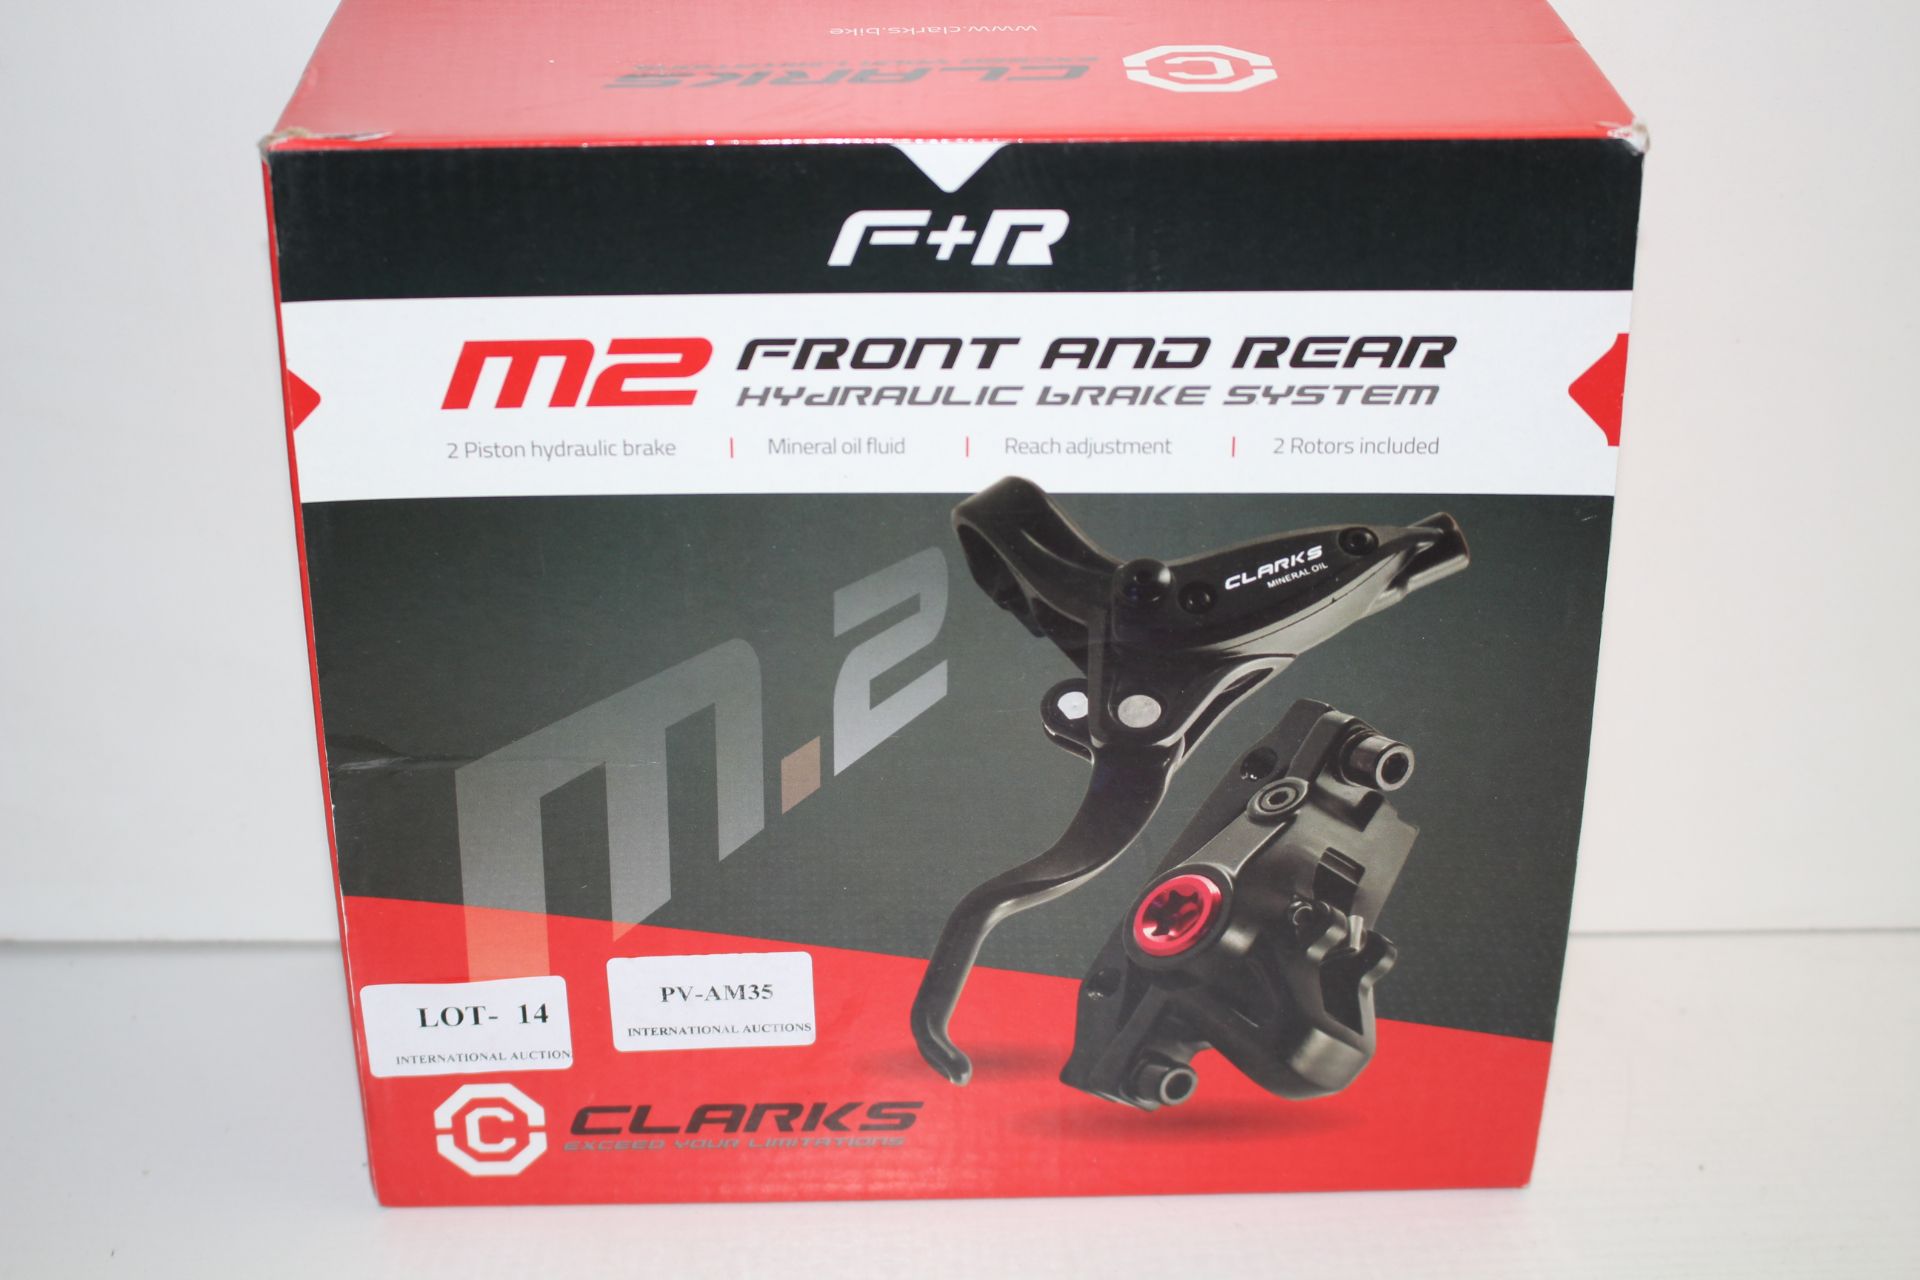 BOXED CLARKS F+R M2 FRONT AND REAR HYDRAULIC BRAKE SYSTEM RRP £57.99Condition ReportAppraisal